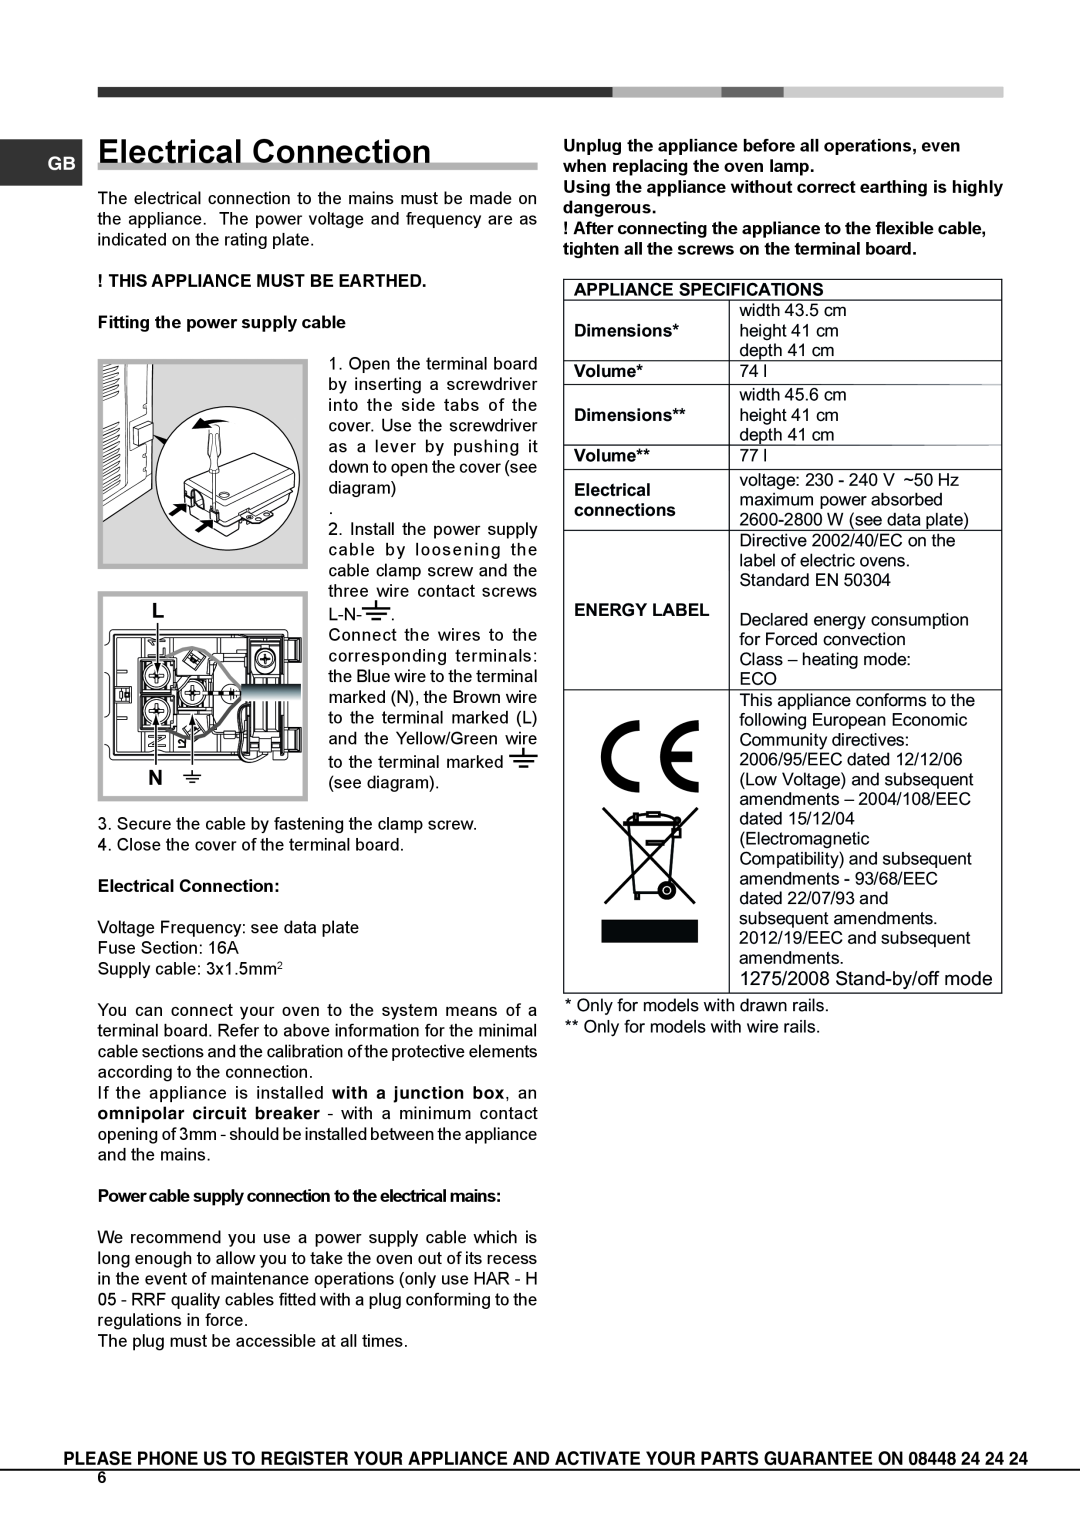 Hotpoint OSHS89EDC manual GB Electrical Connection 